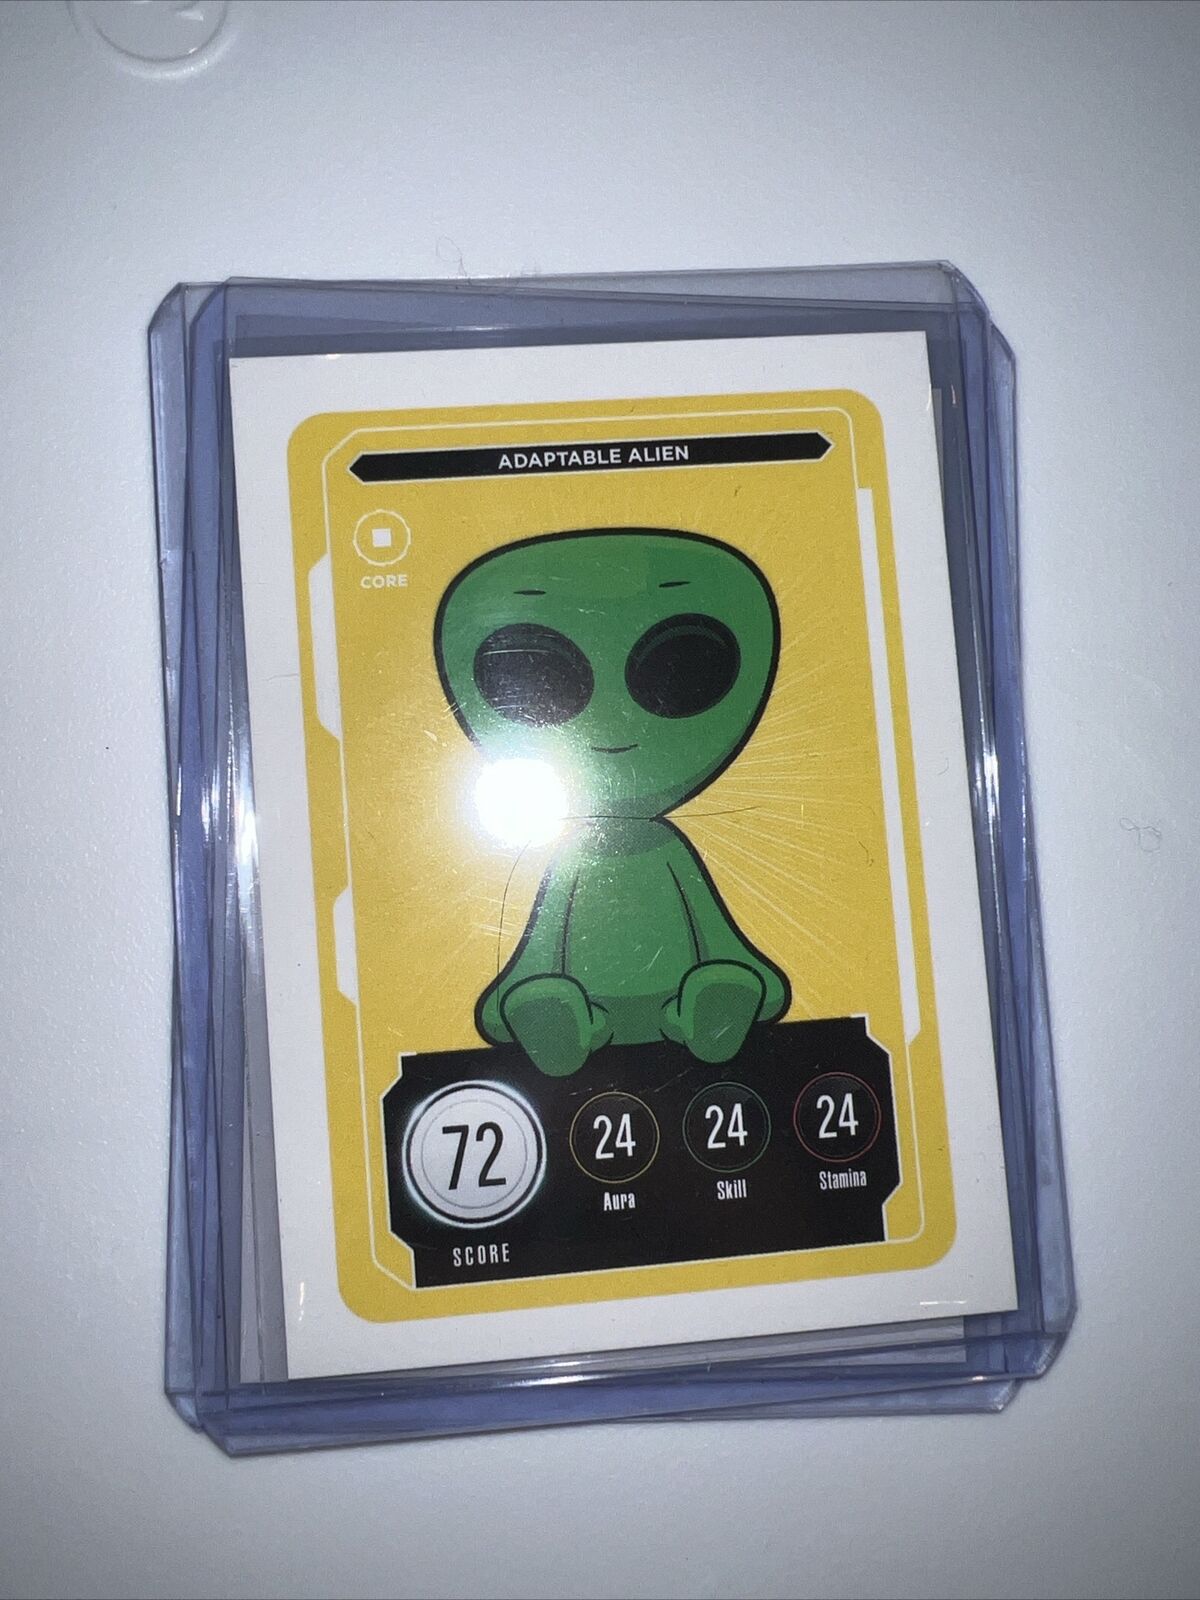 VeeFriends Adaptable Alien Series 2 Compete and Collect Core Card Gary Vee